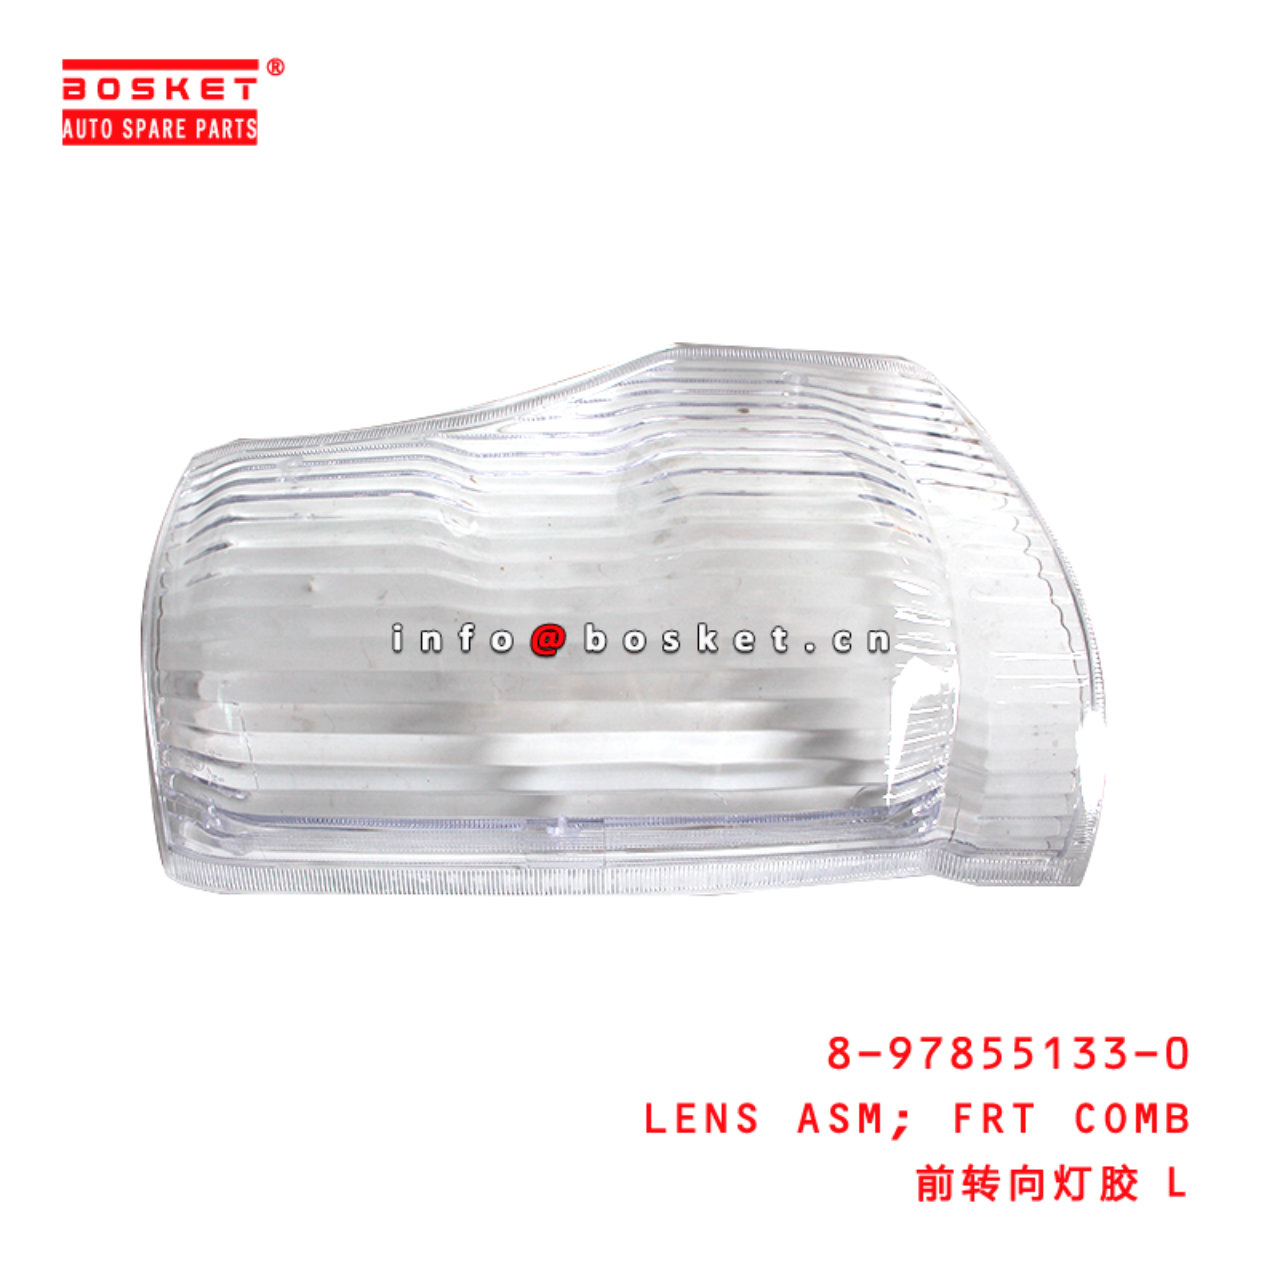 8-97855133-0 Front Combination Lens Assembly suitable for ISUZU NKR77 600P  8978551330